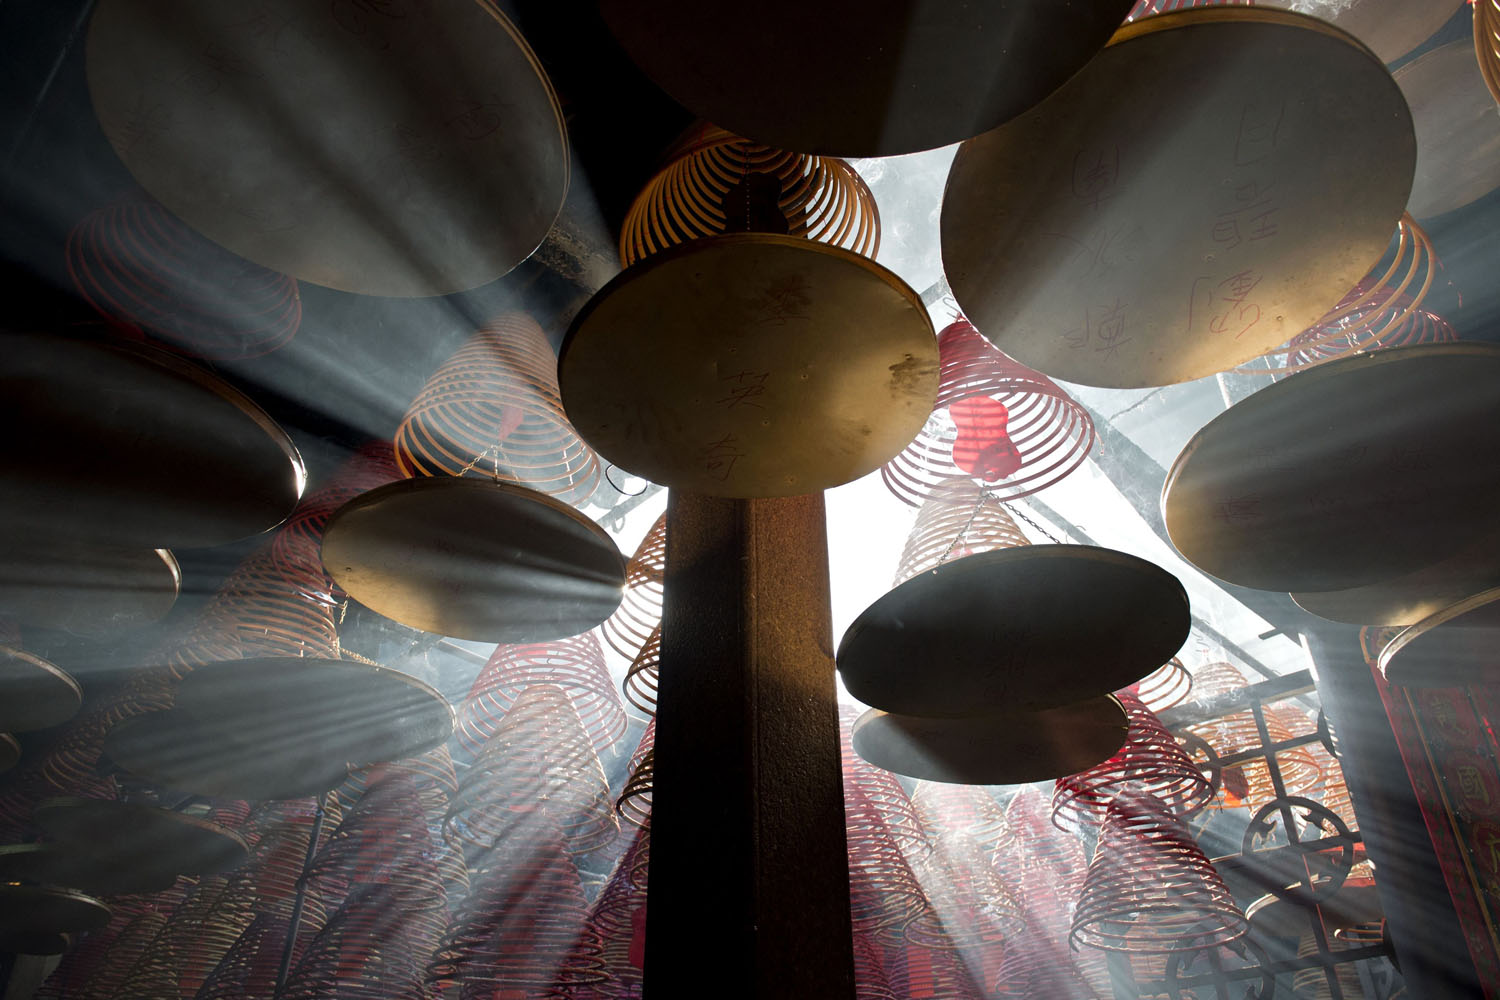 Feb. 3, 2014. Sunlight shines through hanging incense coils at the Tin Hau Temple in the Yau Ma Tei area of Hong Kong on the fourth day of the Lunar New Year holiday.